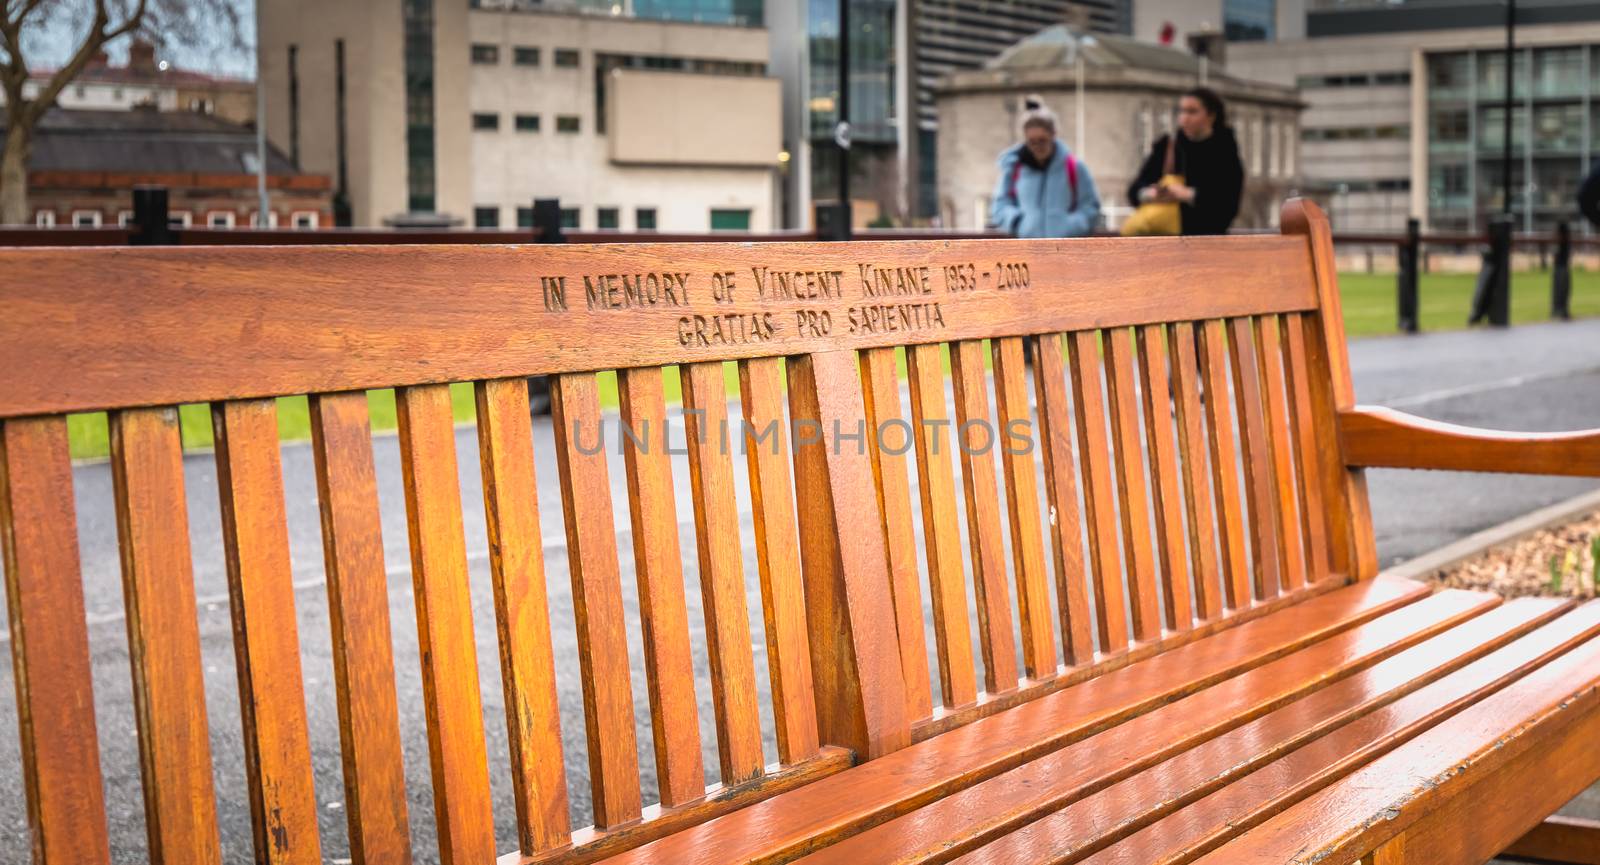 Dublin, Ireland - 11 February 2019: Wooden bench where it is written In memory of Vincent Kinane 1953 - 2000 in the city center on a winter day